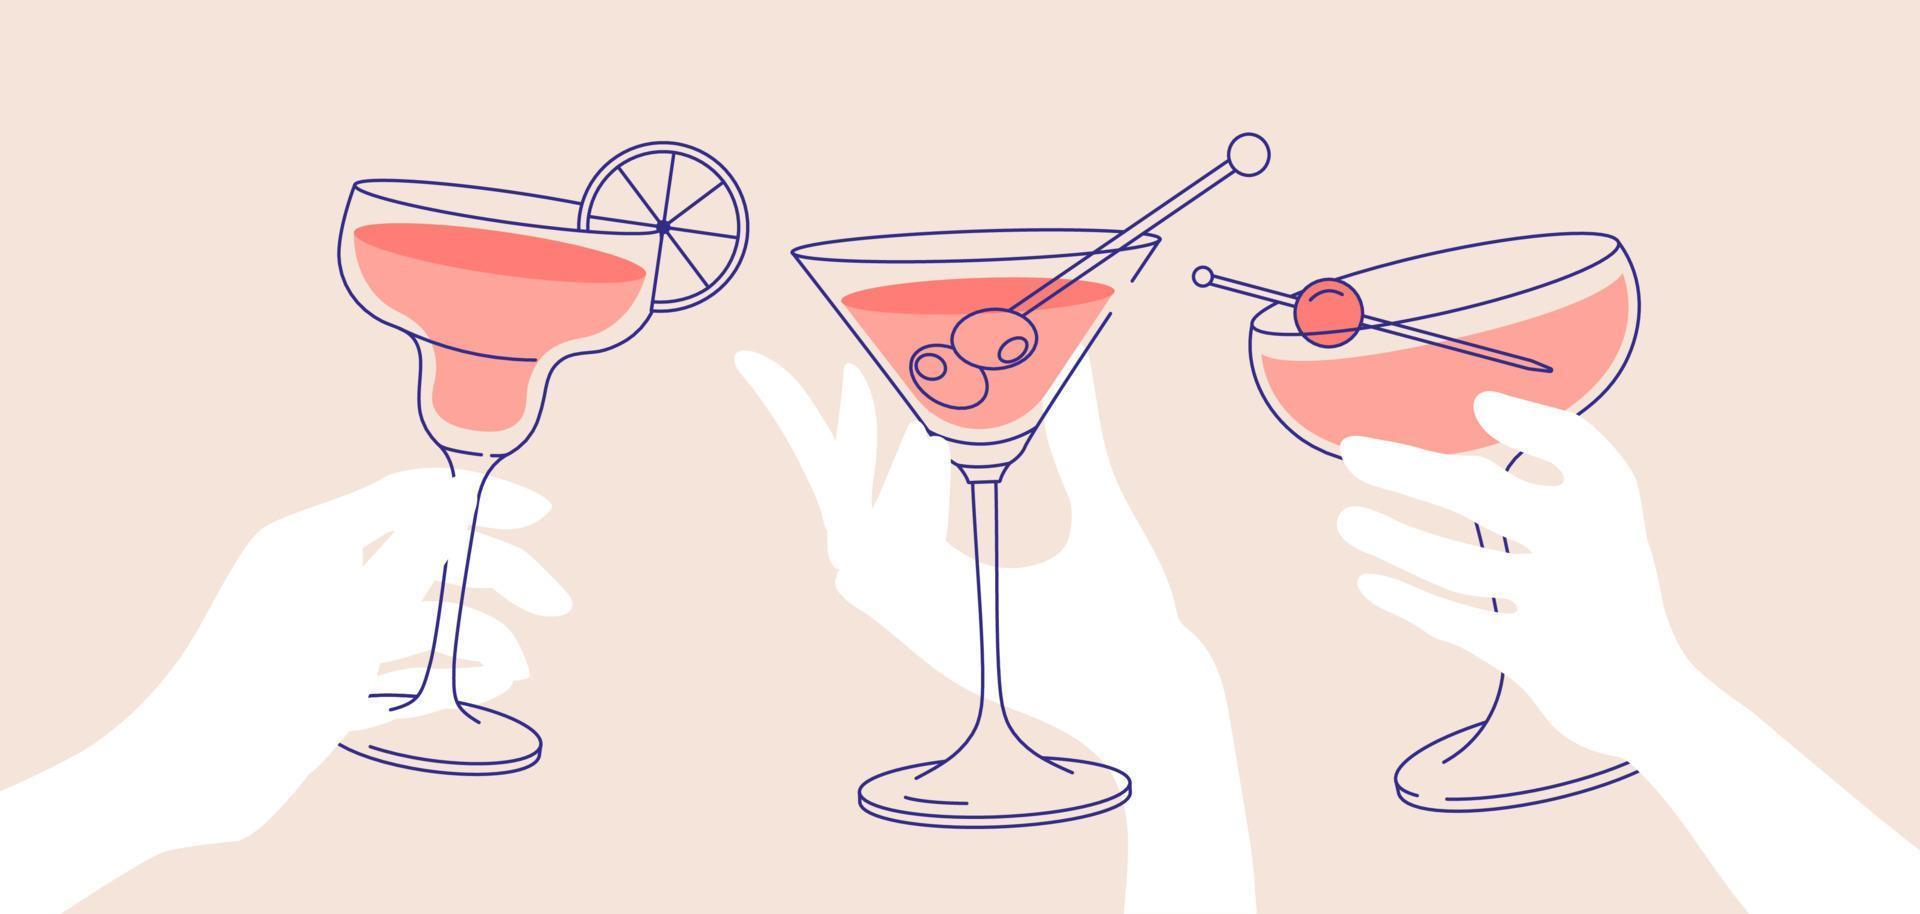 Outline drawing, cheers. Women s hands holding glasses of margaritas and martini. Flat illustration for greeting cards, postcards, invitations, menu design. Line art template vector